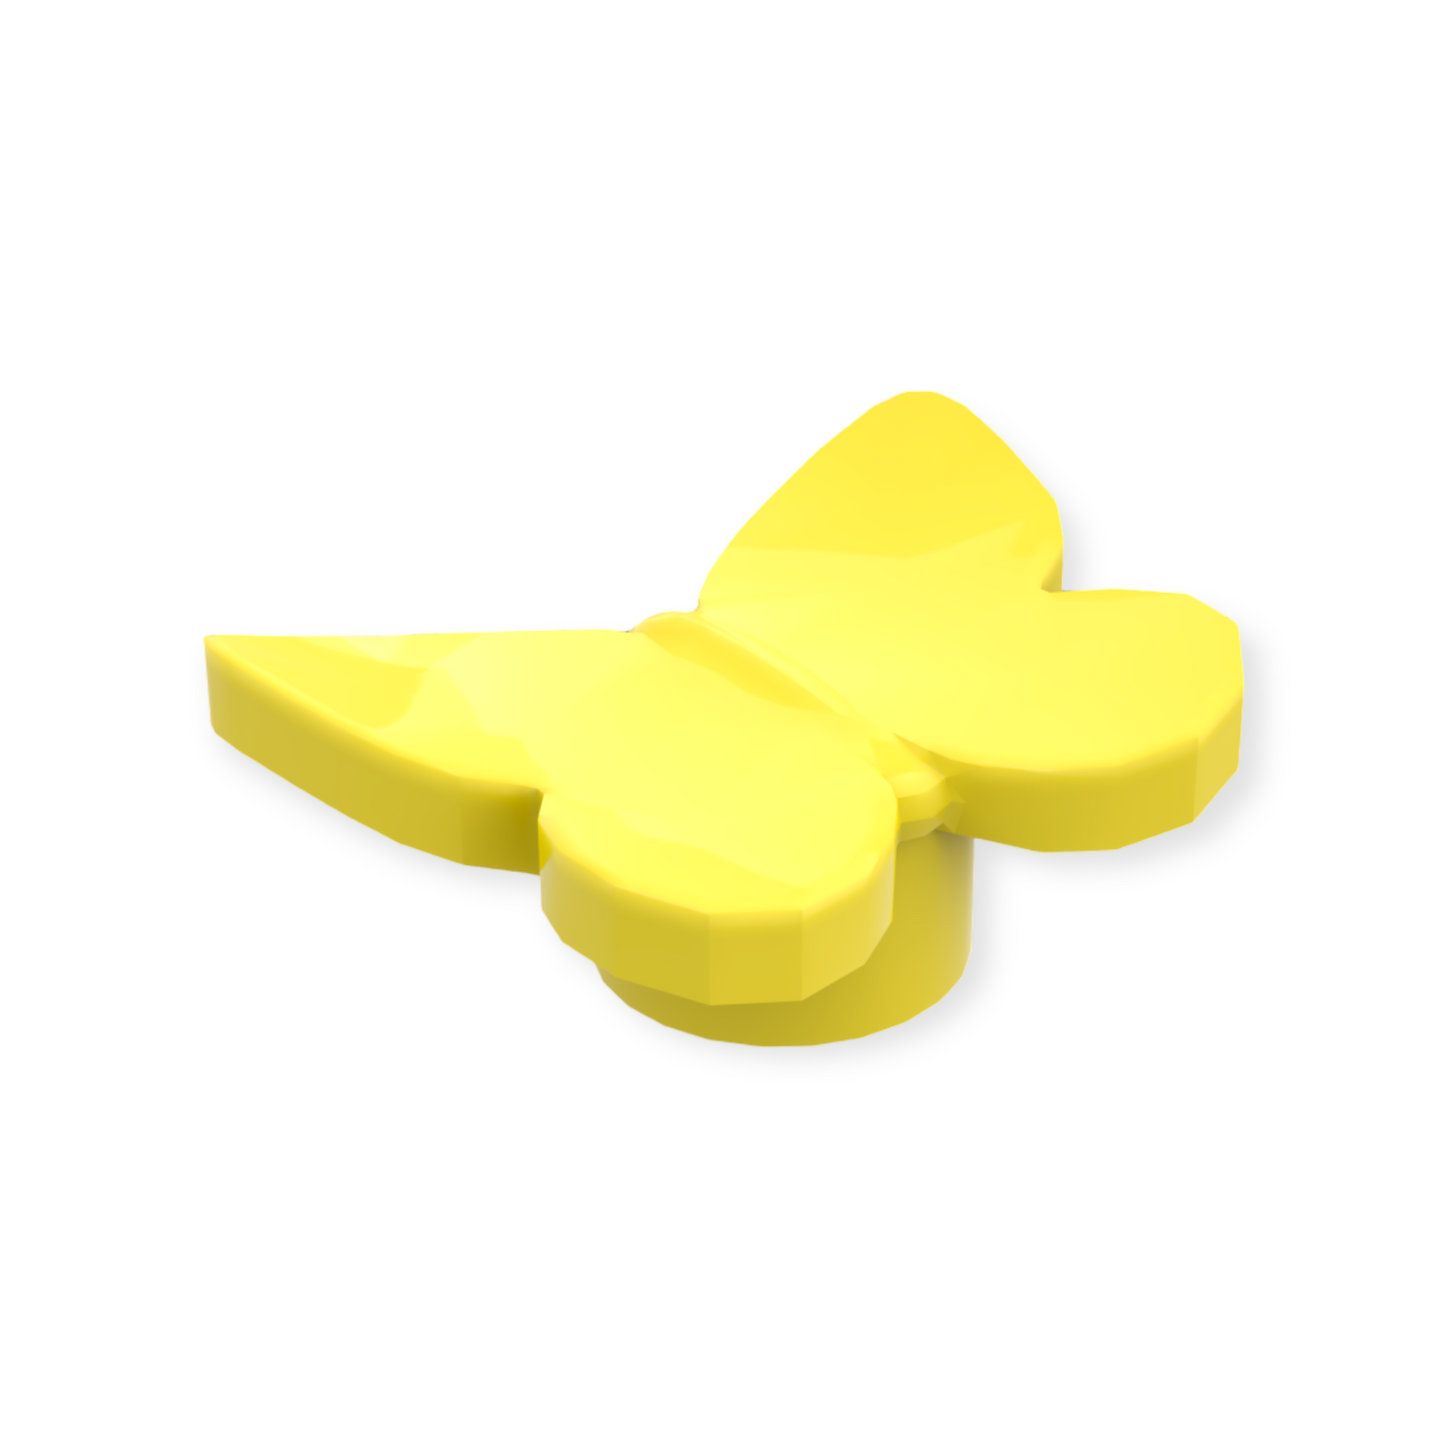 LEGO Butterfly with Stud Holder - Yellow